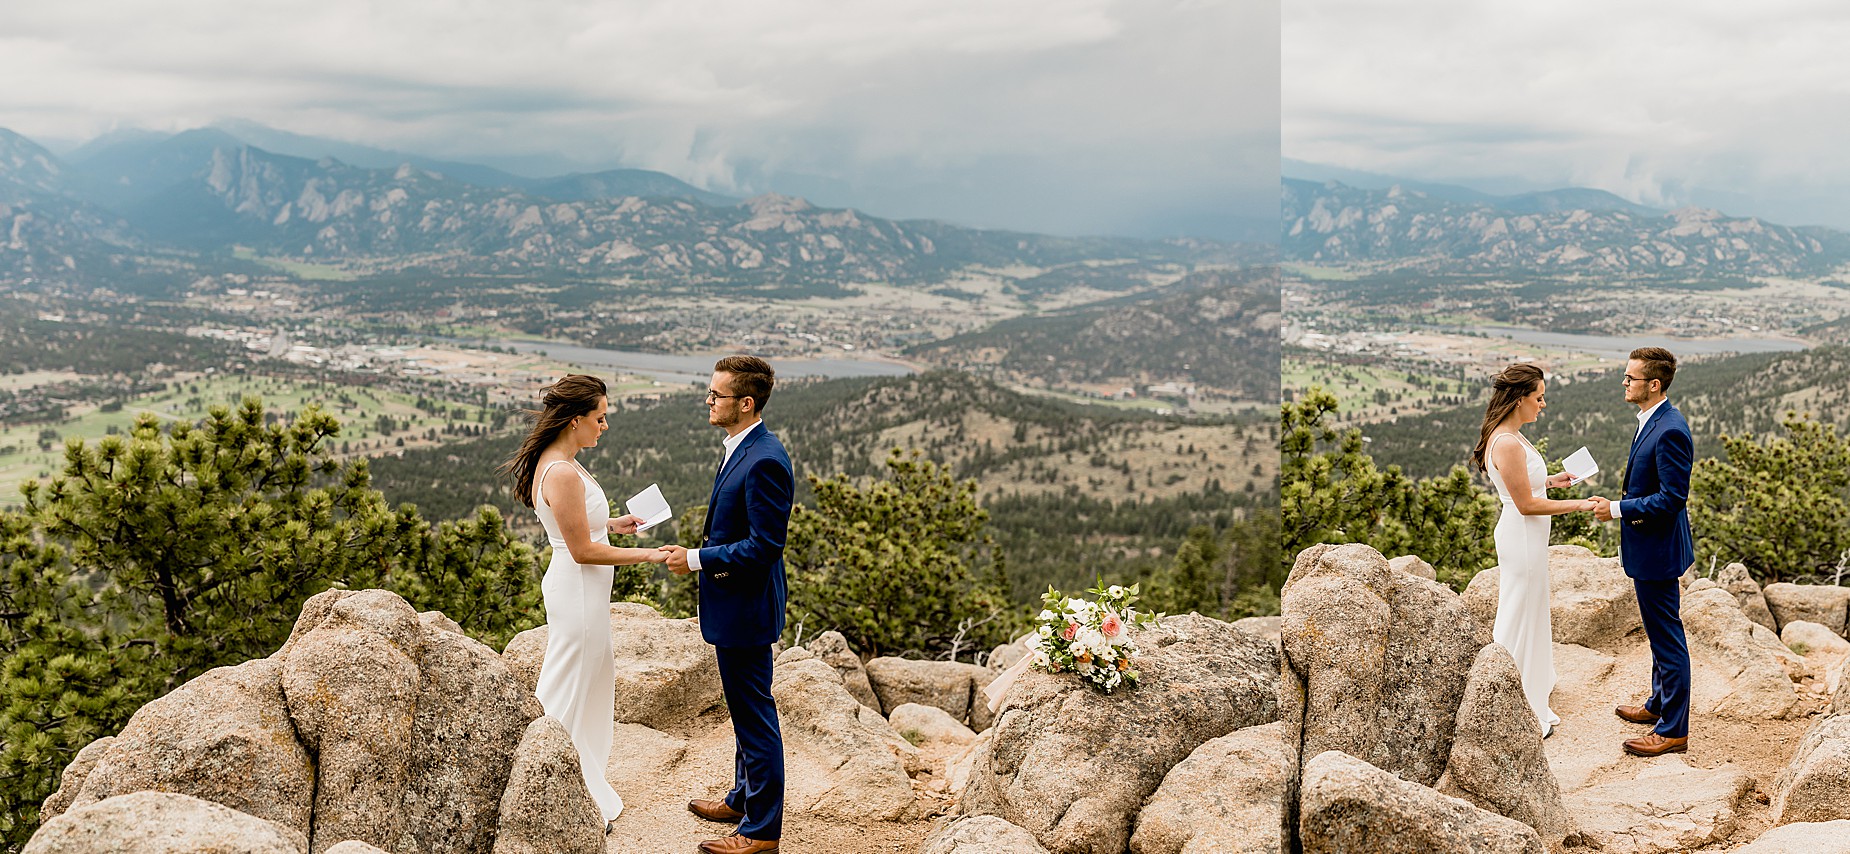 Bride and groom share vows with gorgeous Rocky Mountain views in the background for their Colorado hiking elopement